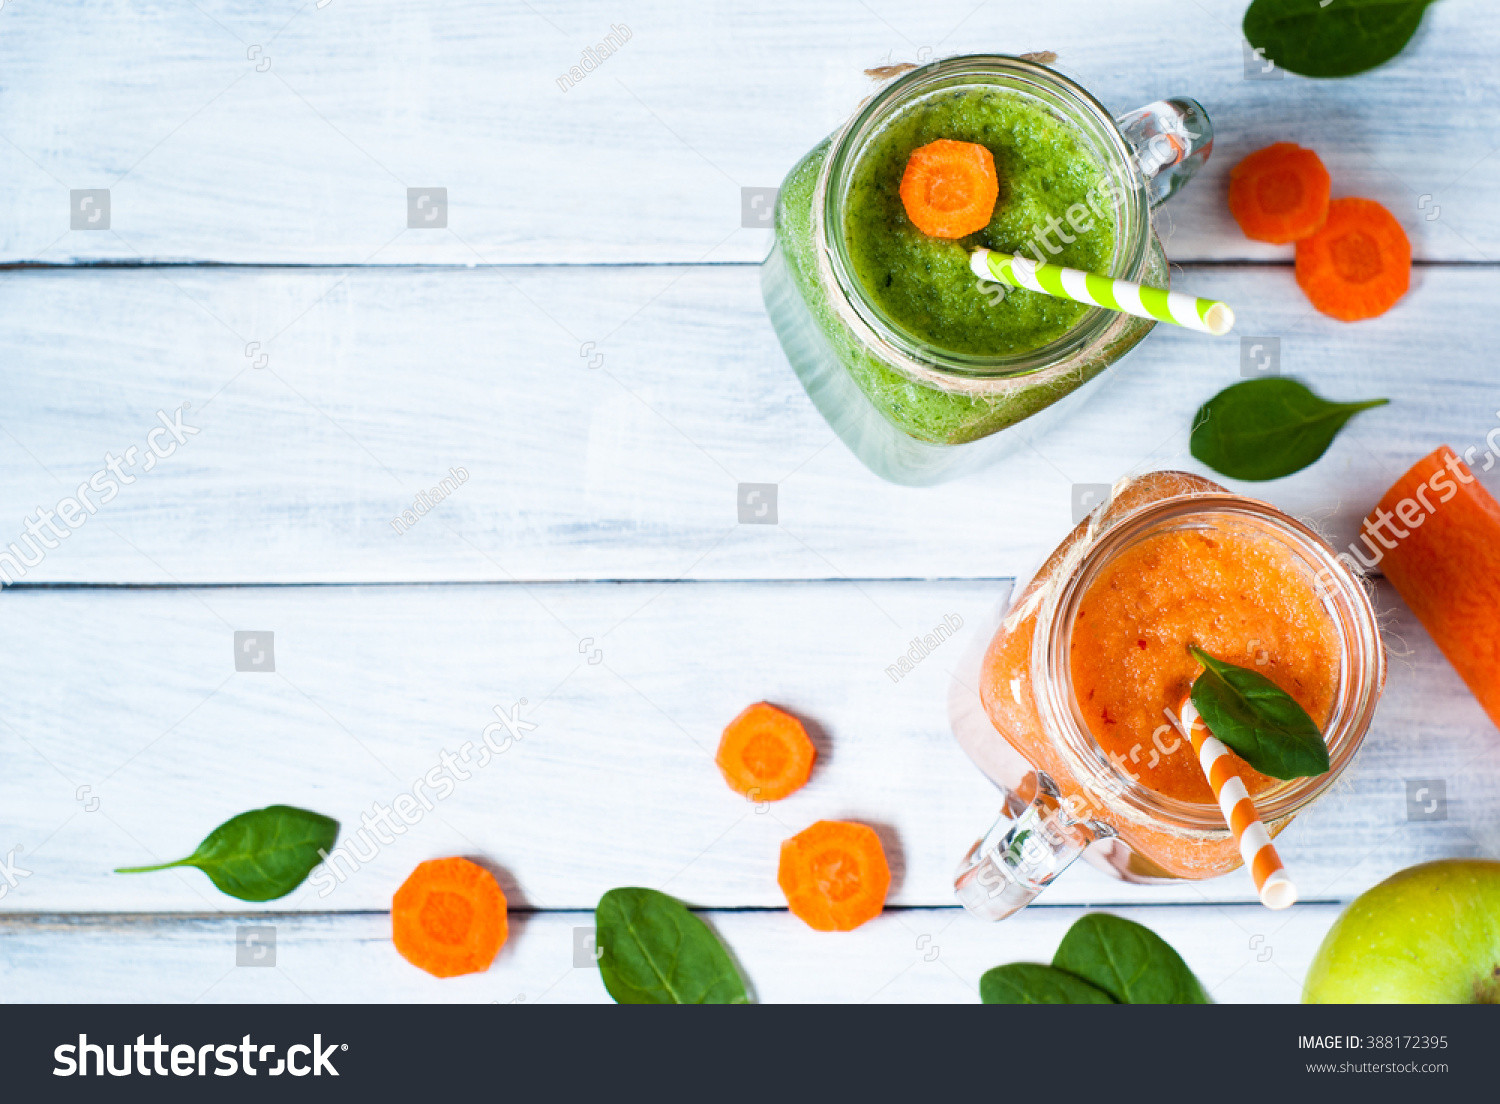 Healthy Fruit And Veggie Smoothies
 Orange Green Fruit Ve able Smoothie Healthy Stock